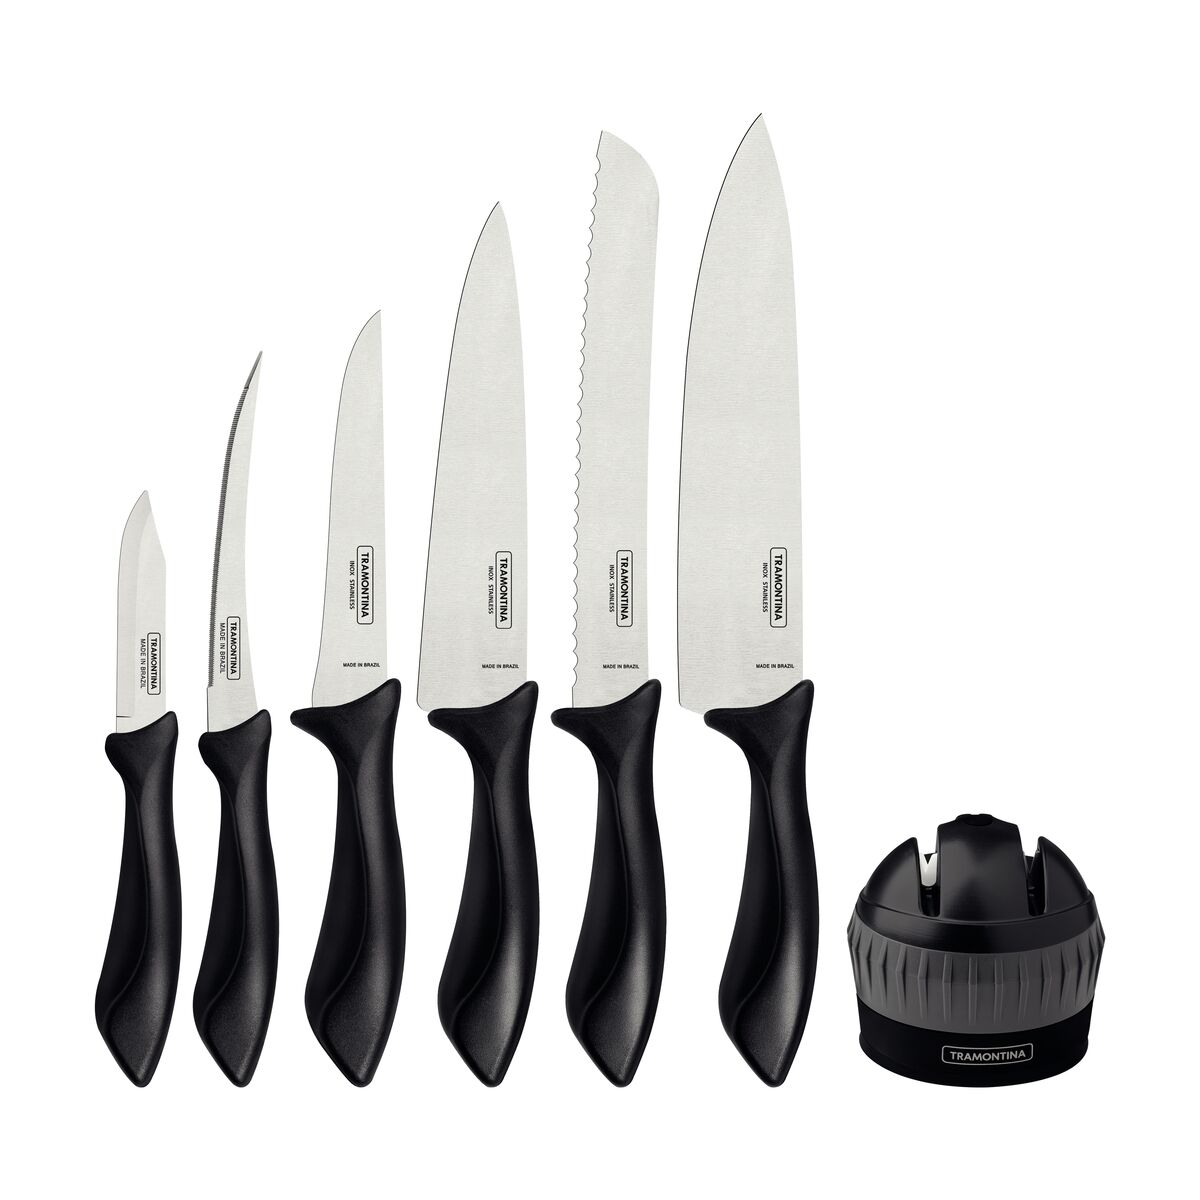 Tramontina Affilata 7-Piece Knife Set with Stainless-Steel Blades and Black Polypropylene Handles